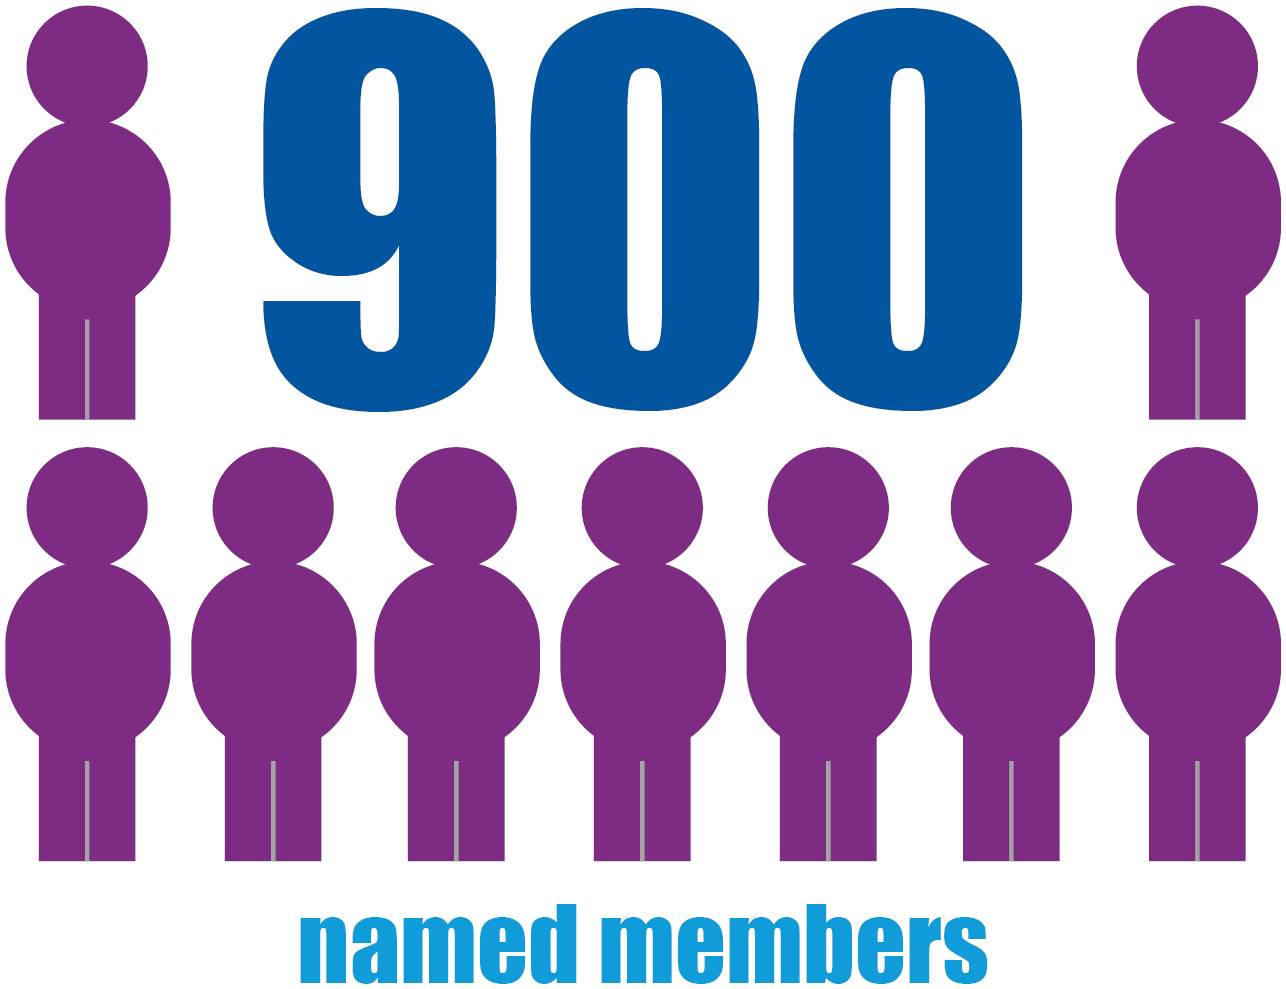 Over 900 Student Services professionals are AMOSSHE members